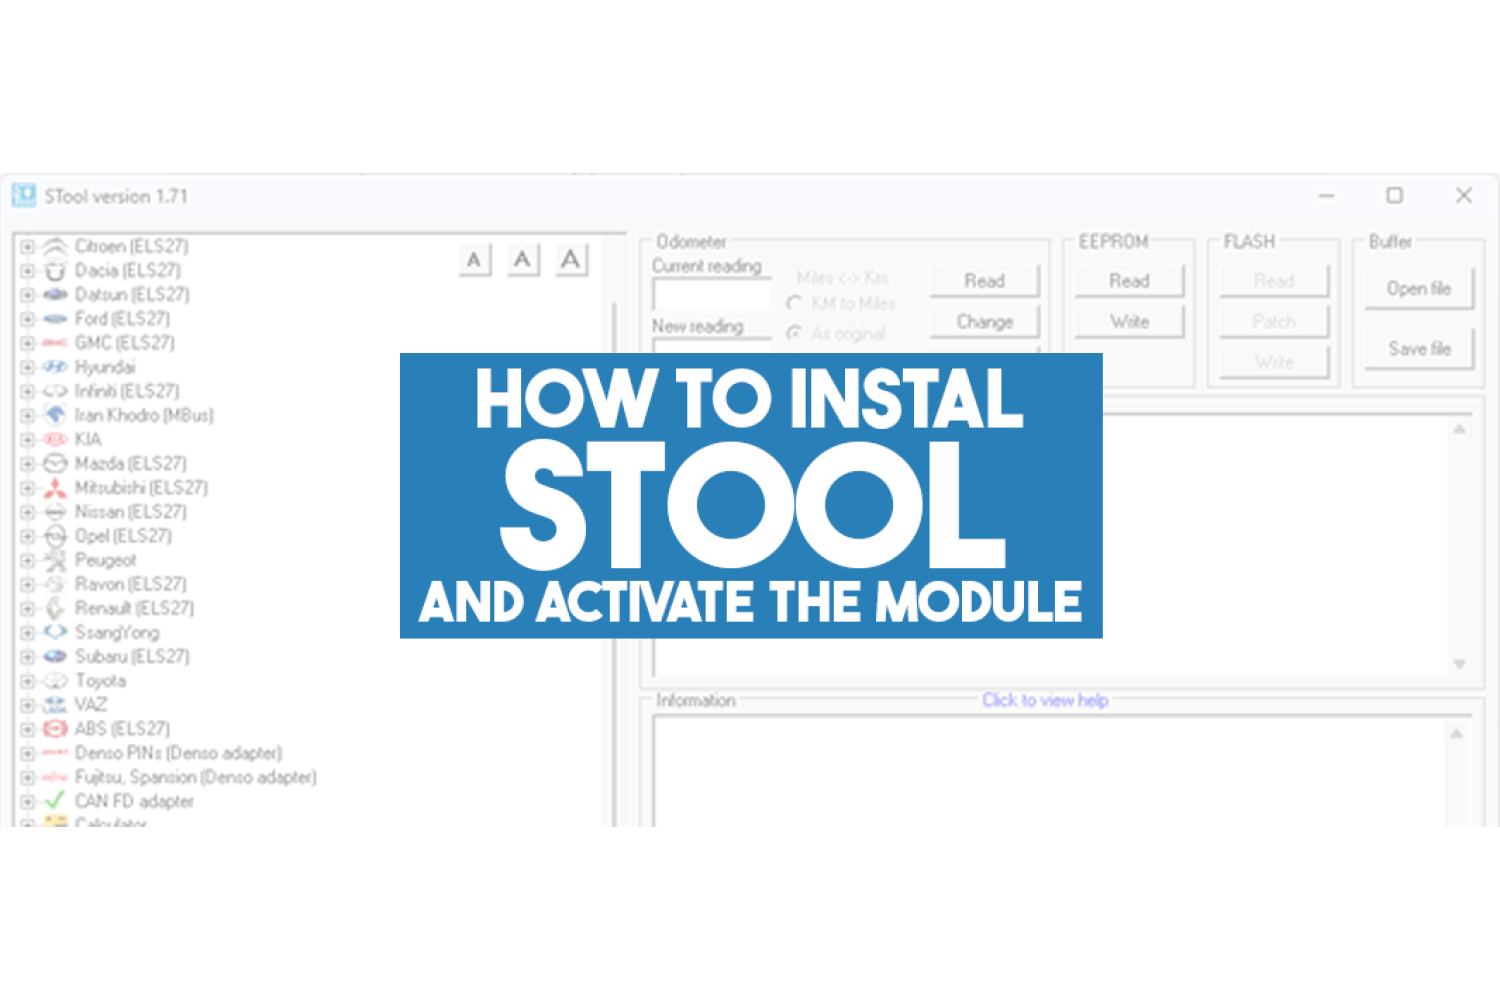 How to install STool and activate module